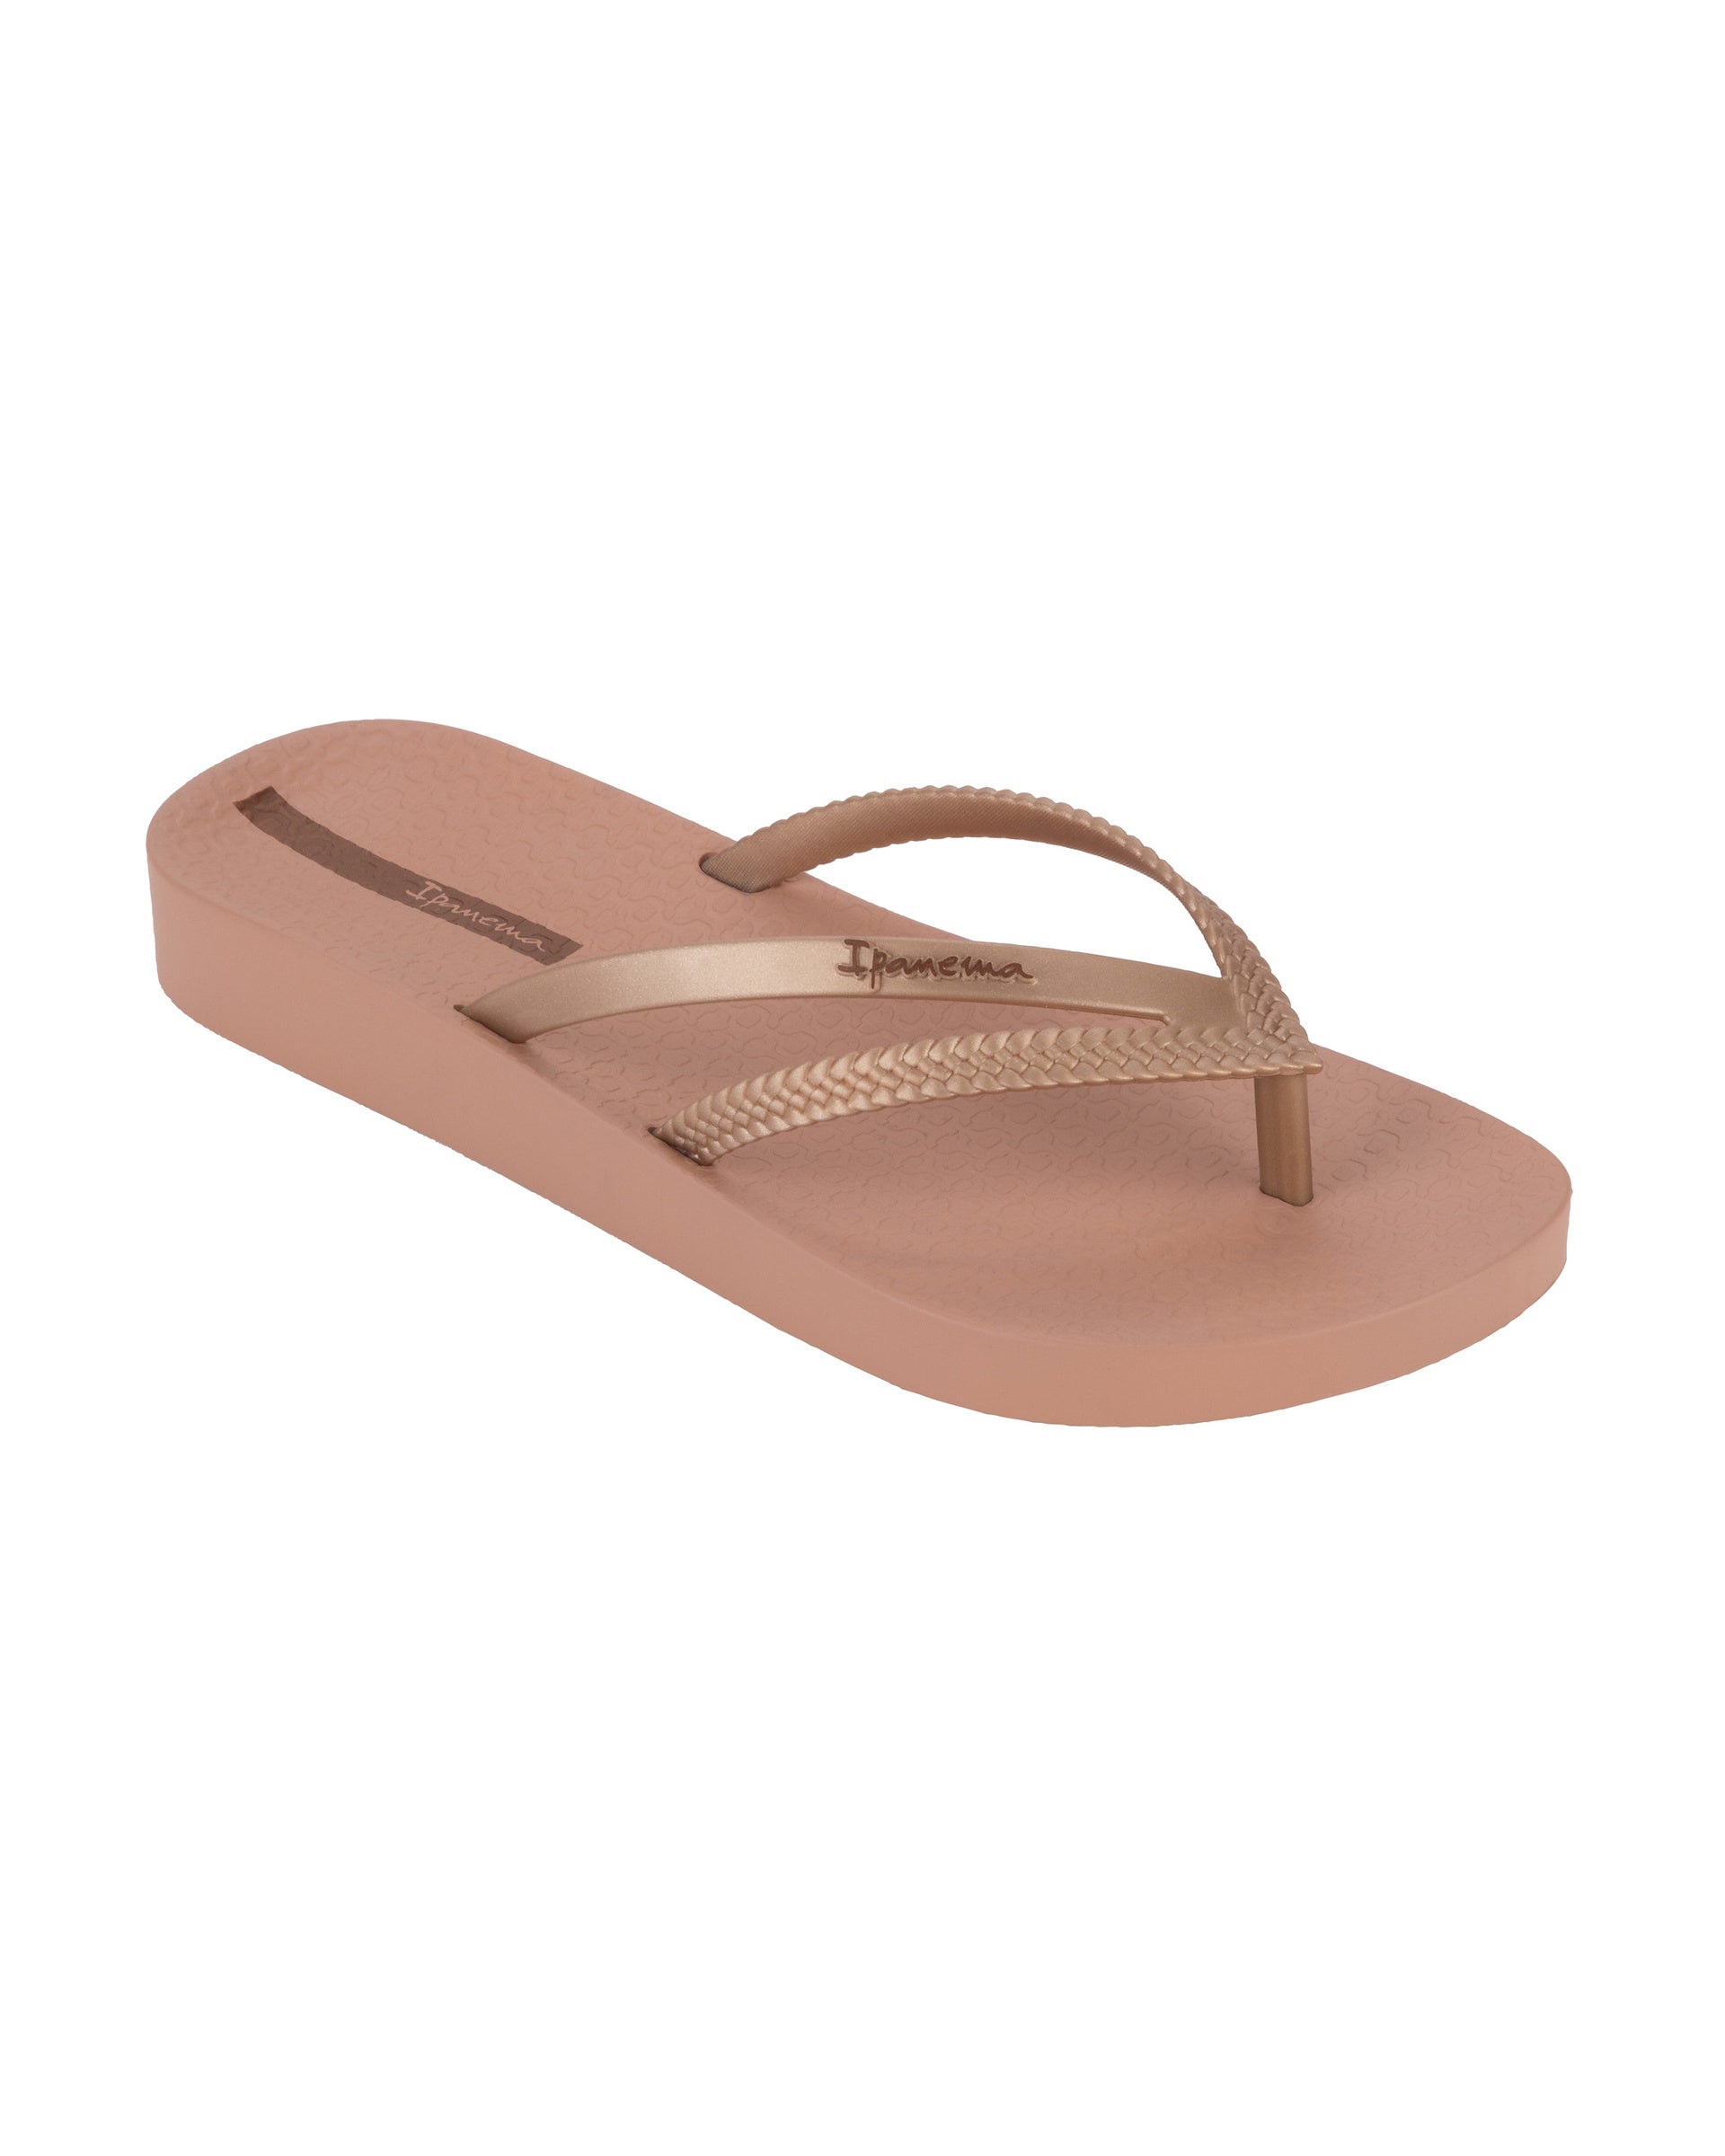 Angled view of a pink Ipanema Bossa Soft women's flip flop with metallic rose gold straps.